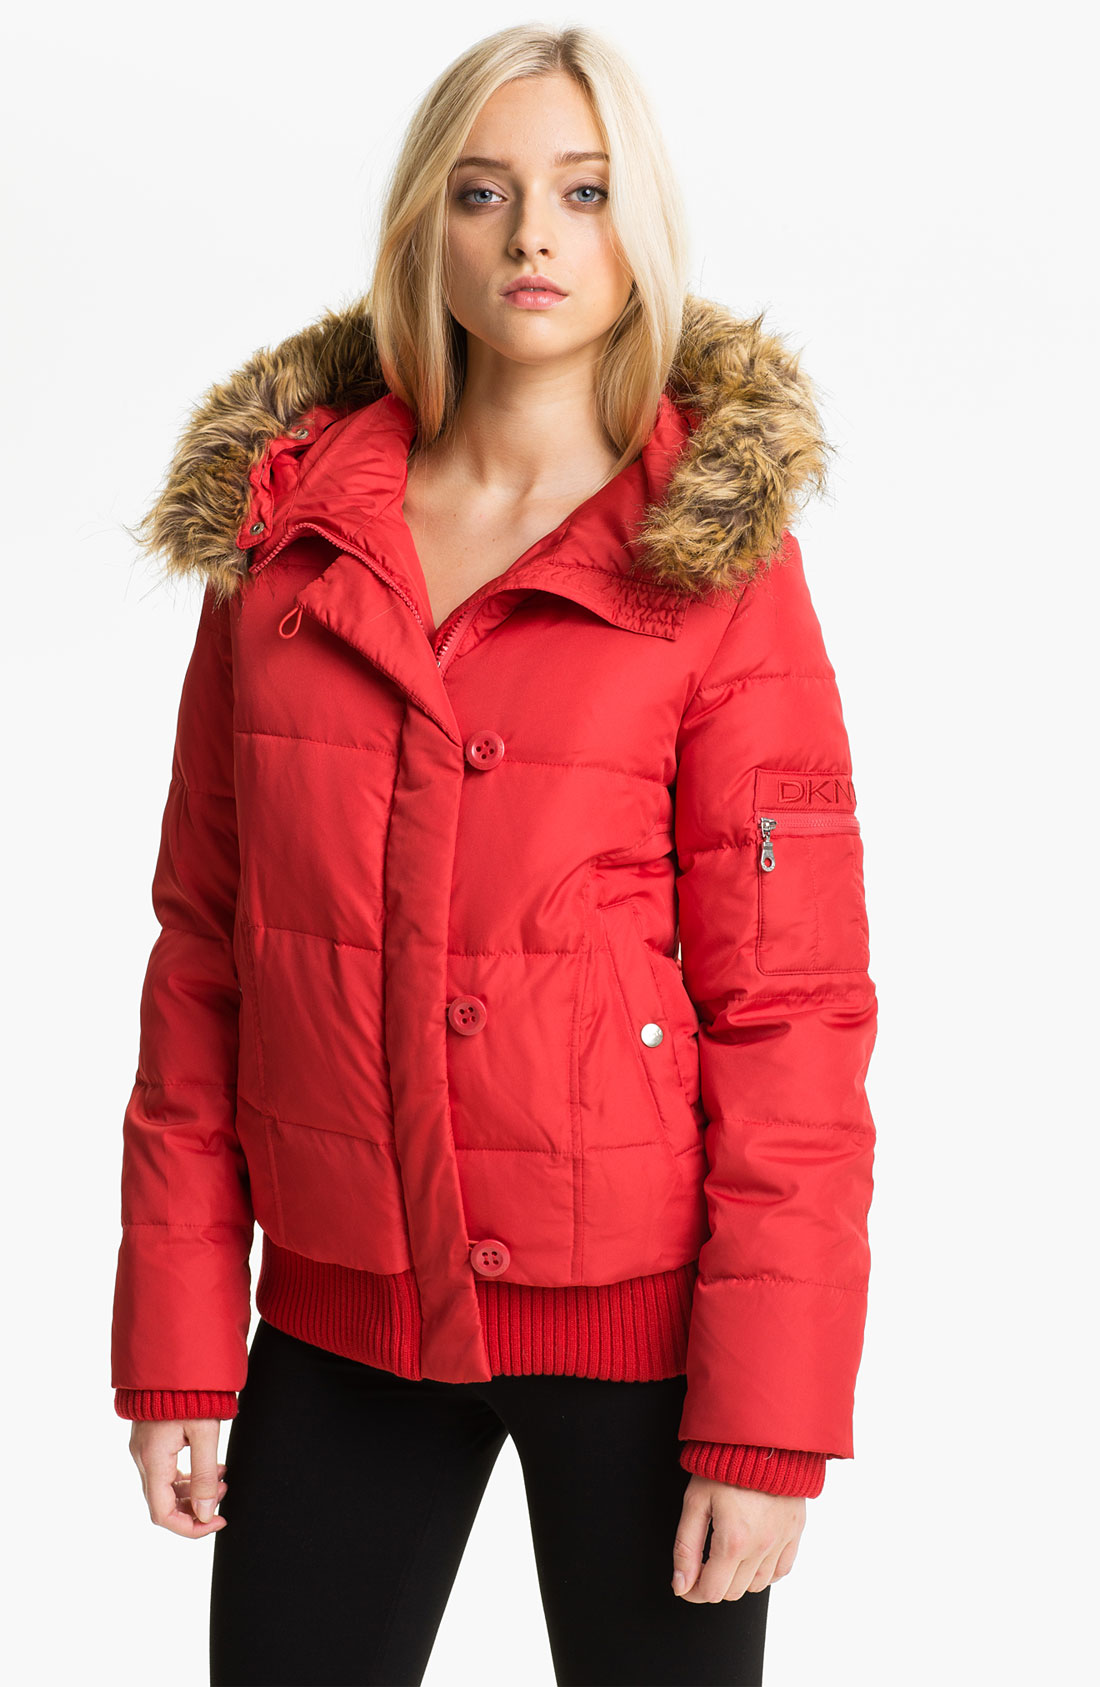 Dkny Faux Fur Trim Split Hood Quilted Bomber Online Exclusive in Red | Lyst